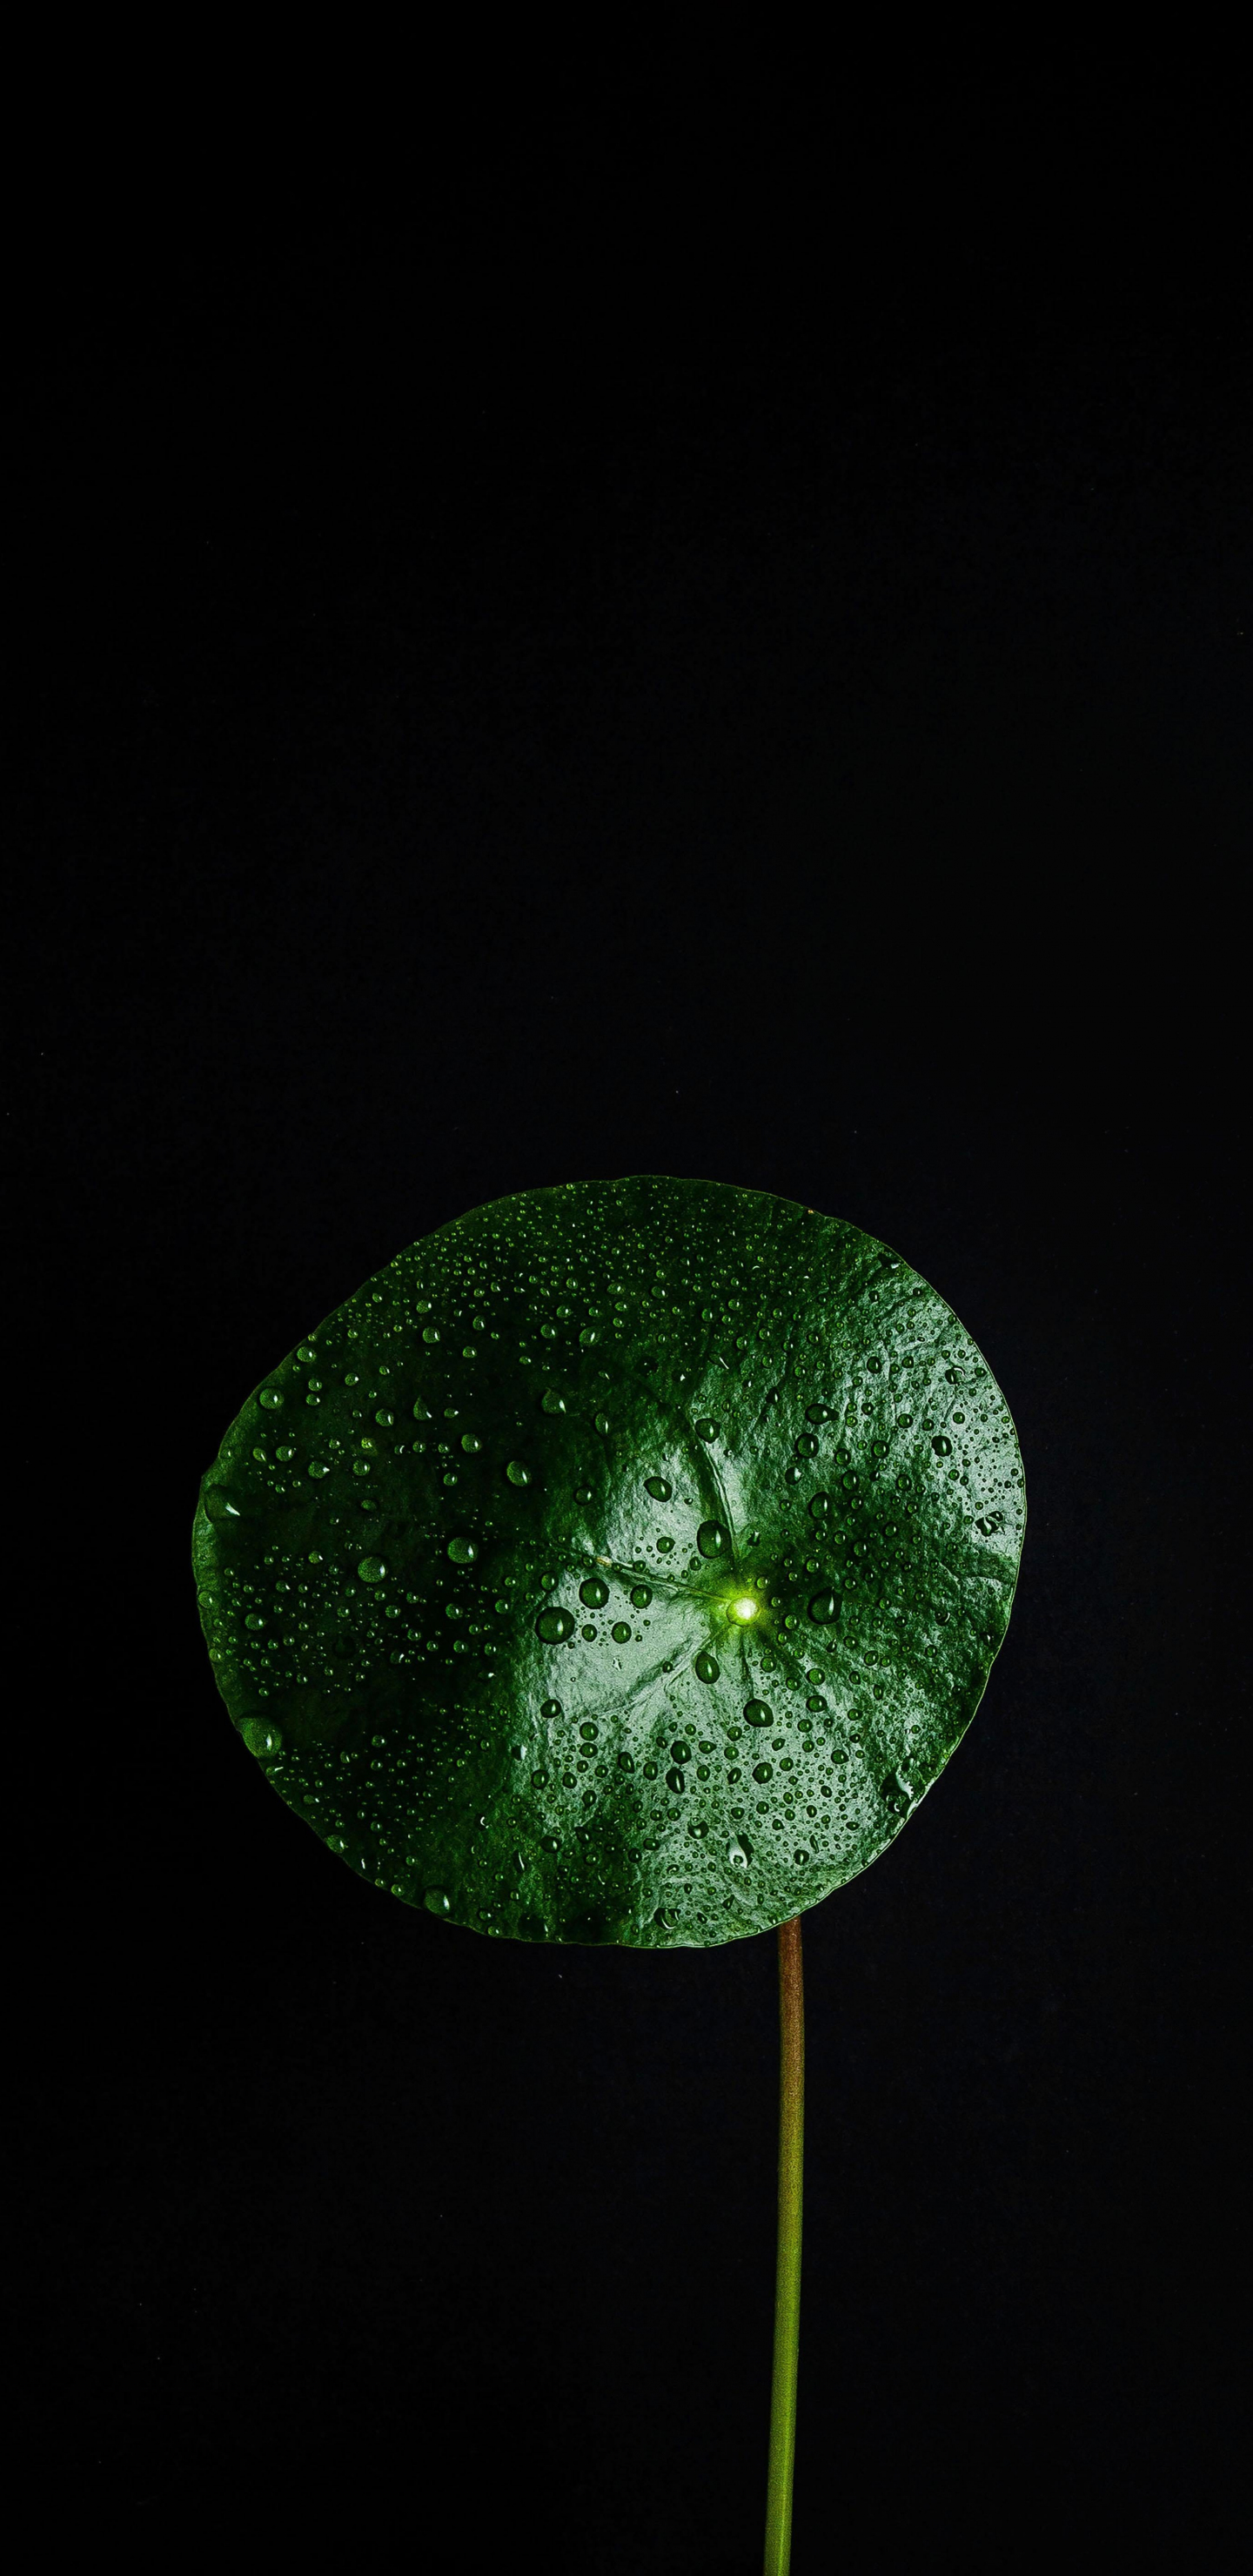 Download wallpaper 1440x2960 green leaf, drops on surface, close up